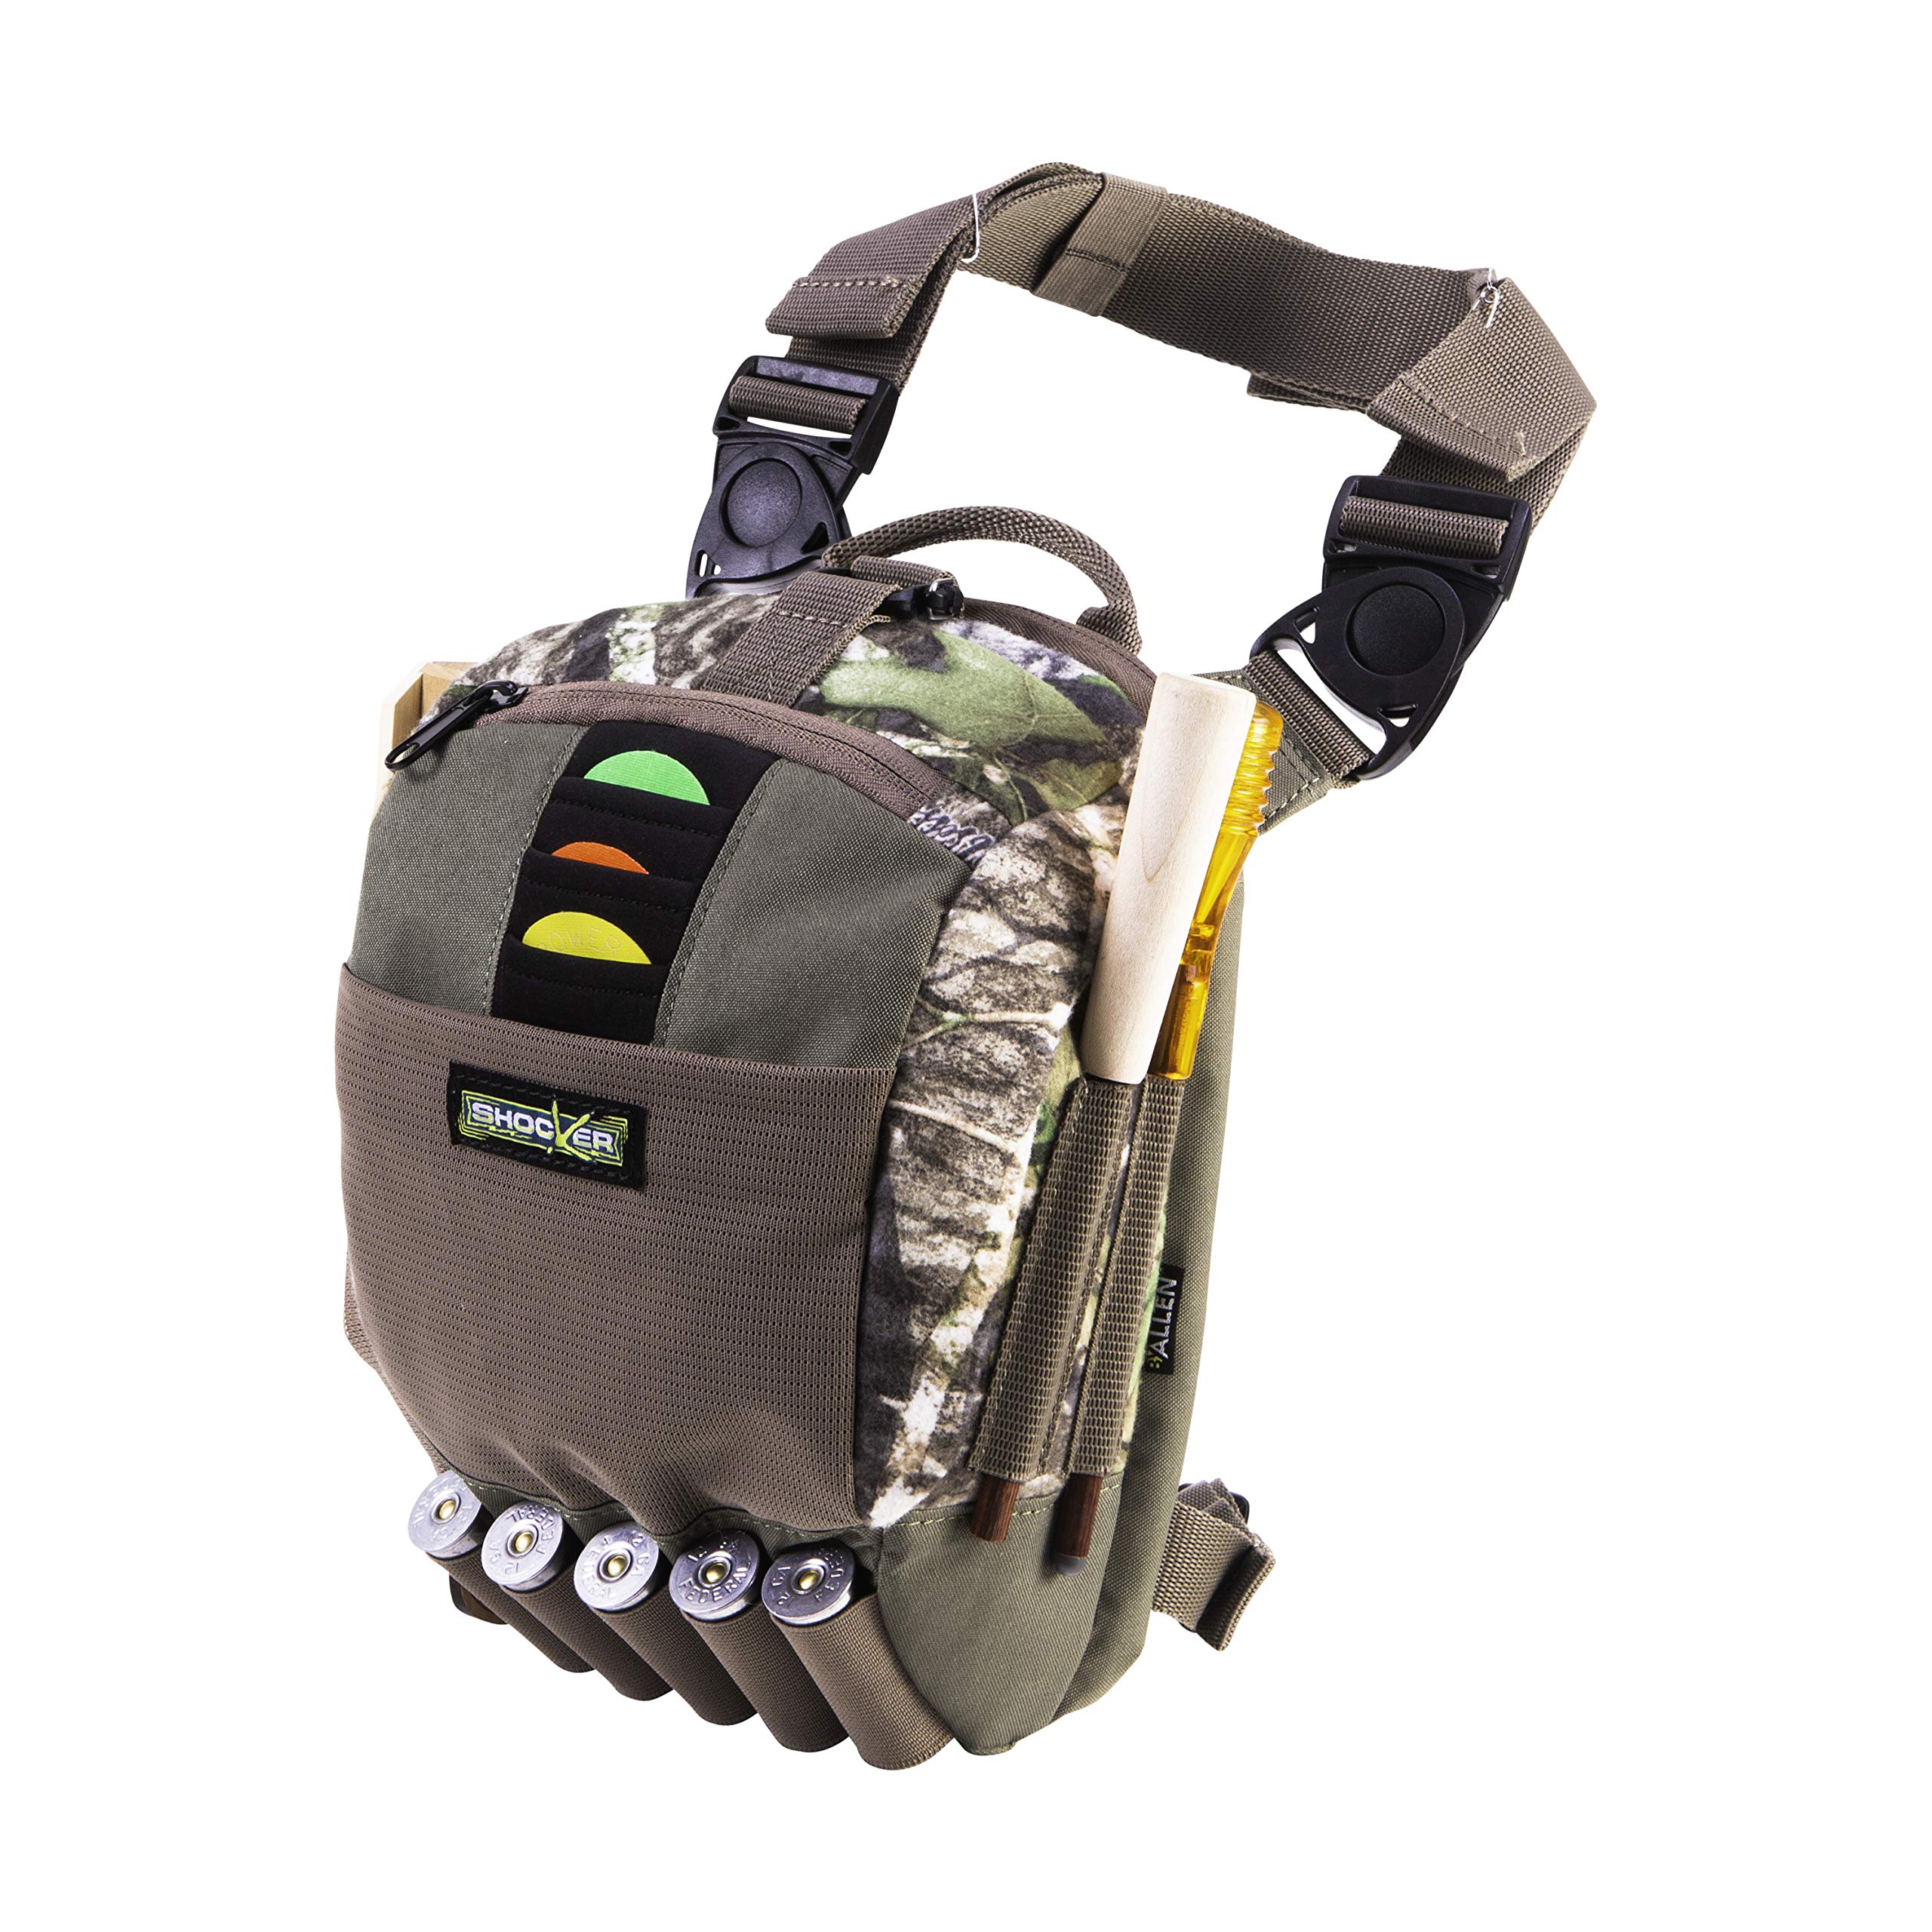 Allen Company Shocker Cut-N-Run Turkey Hunting Pack - 3in1: Thigh Pack, Sling Pack, Chest Pack - 9 Features, 10 Inch/315 Cubic inches / 5.2 L, Camo 19170 One Size